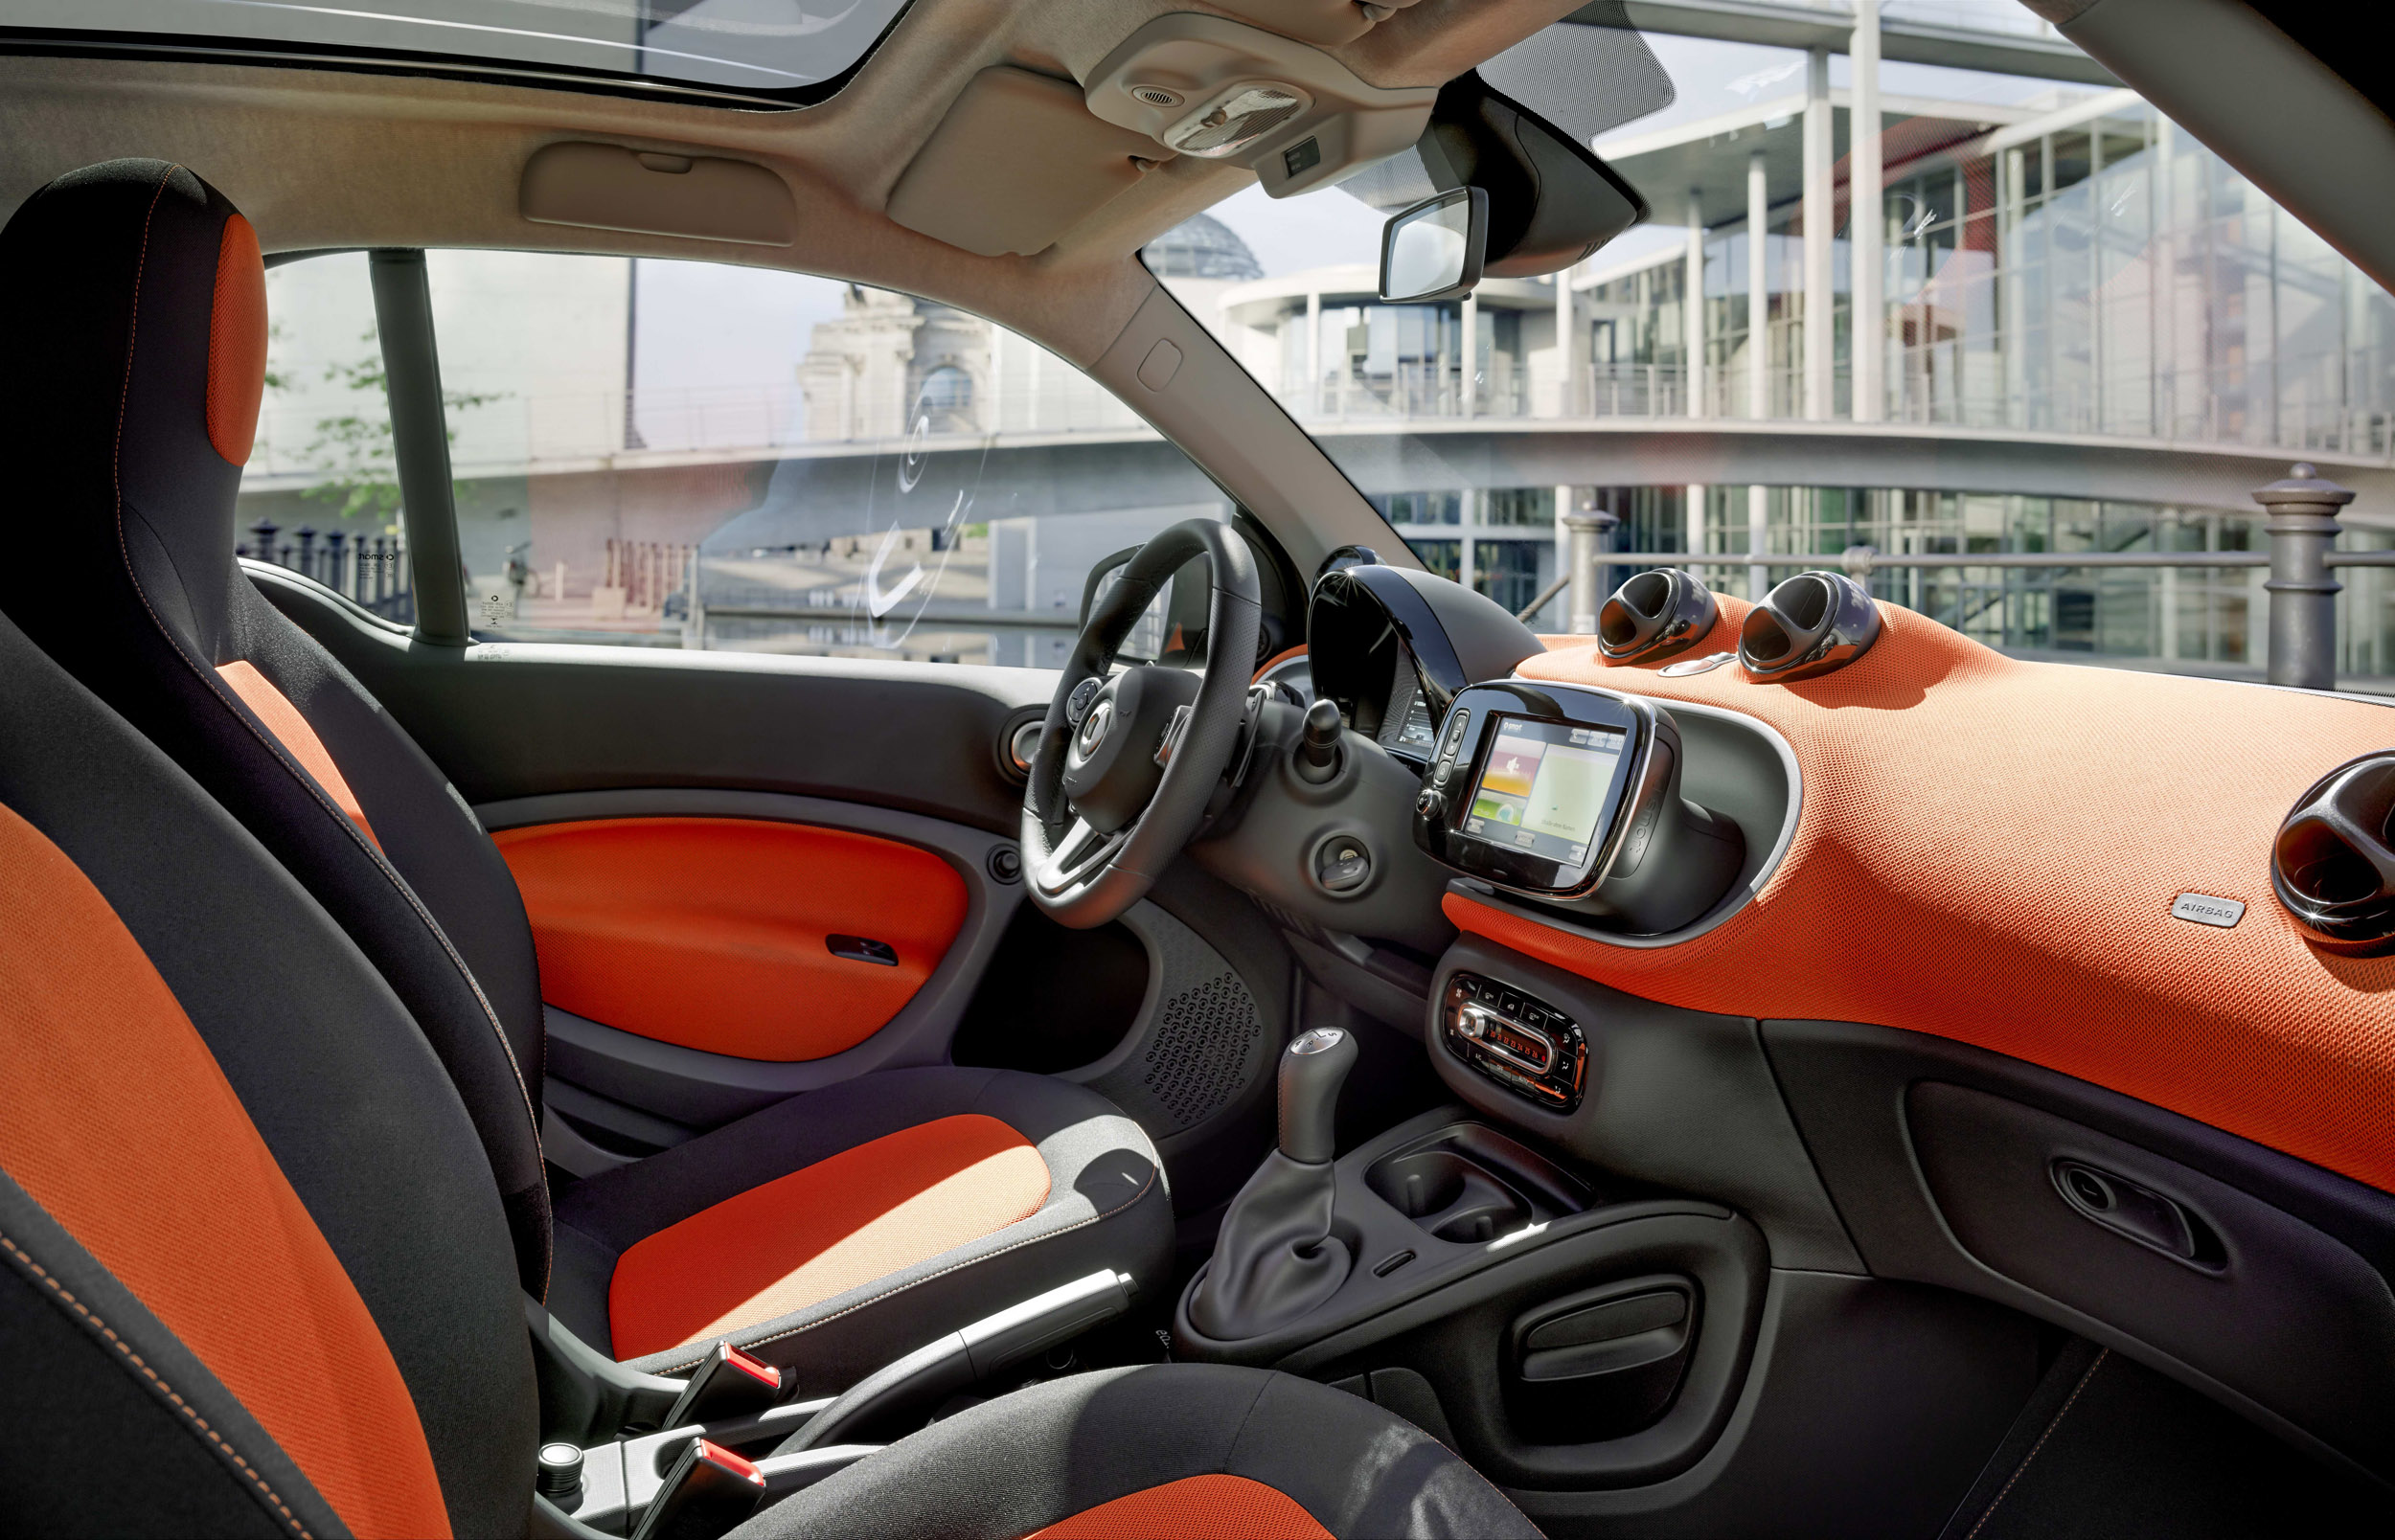 2015 Smart fortwo, Specifications - Car Specs